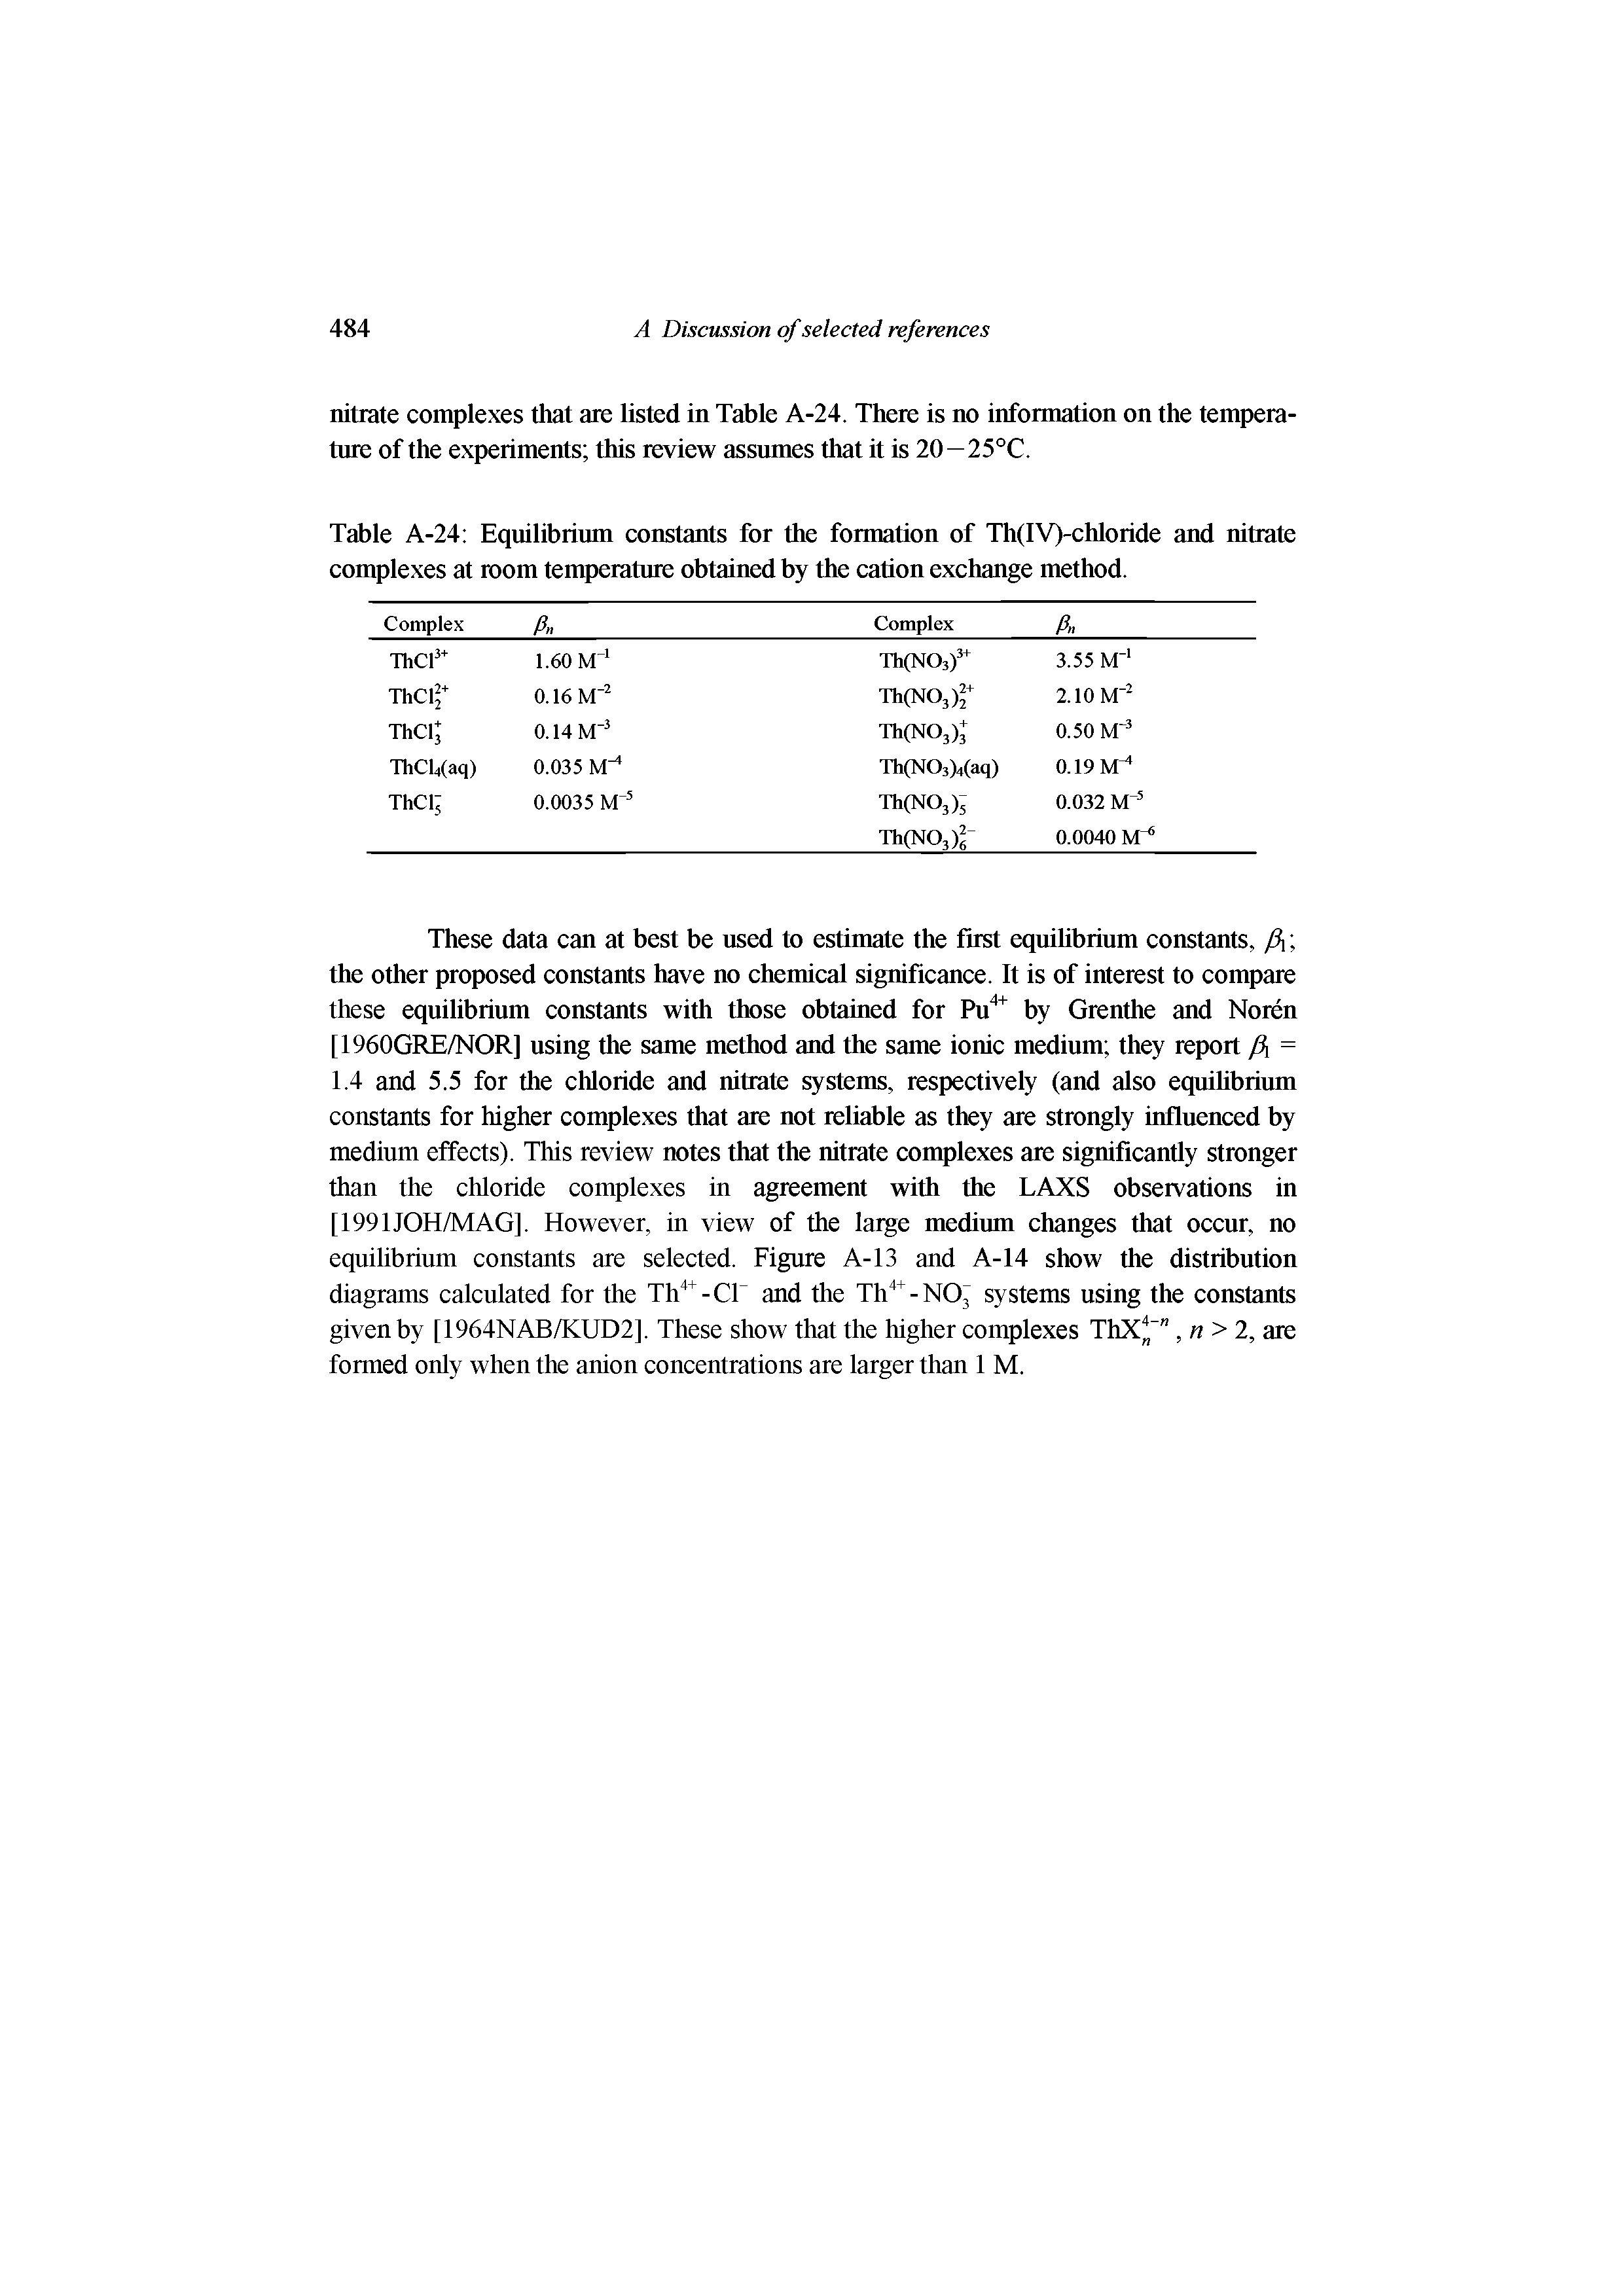 Table A-24 Equilibrium constants for the formation of Th(IV)-chloride and nitrate complexes at room temperature obtained by the cation exchange method.